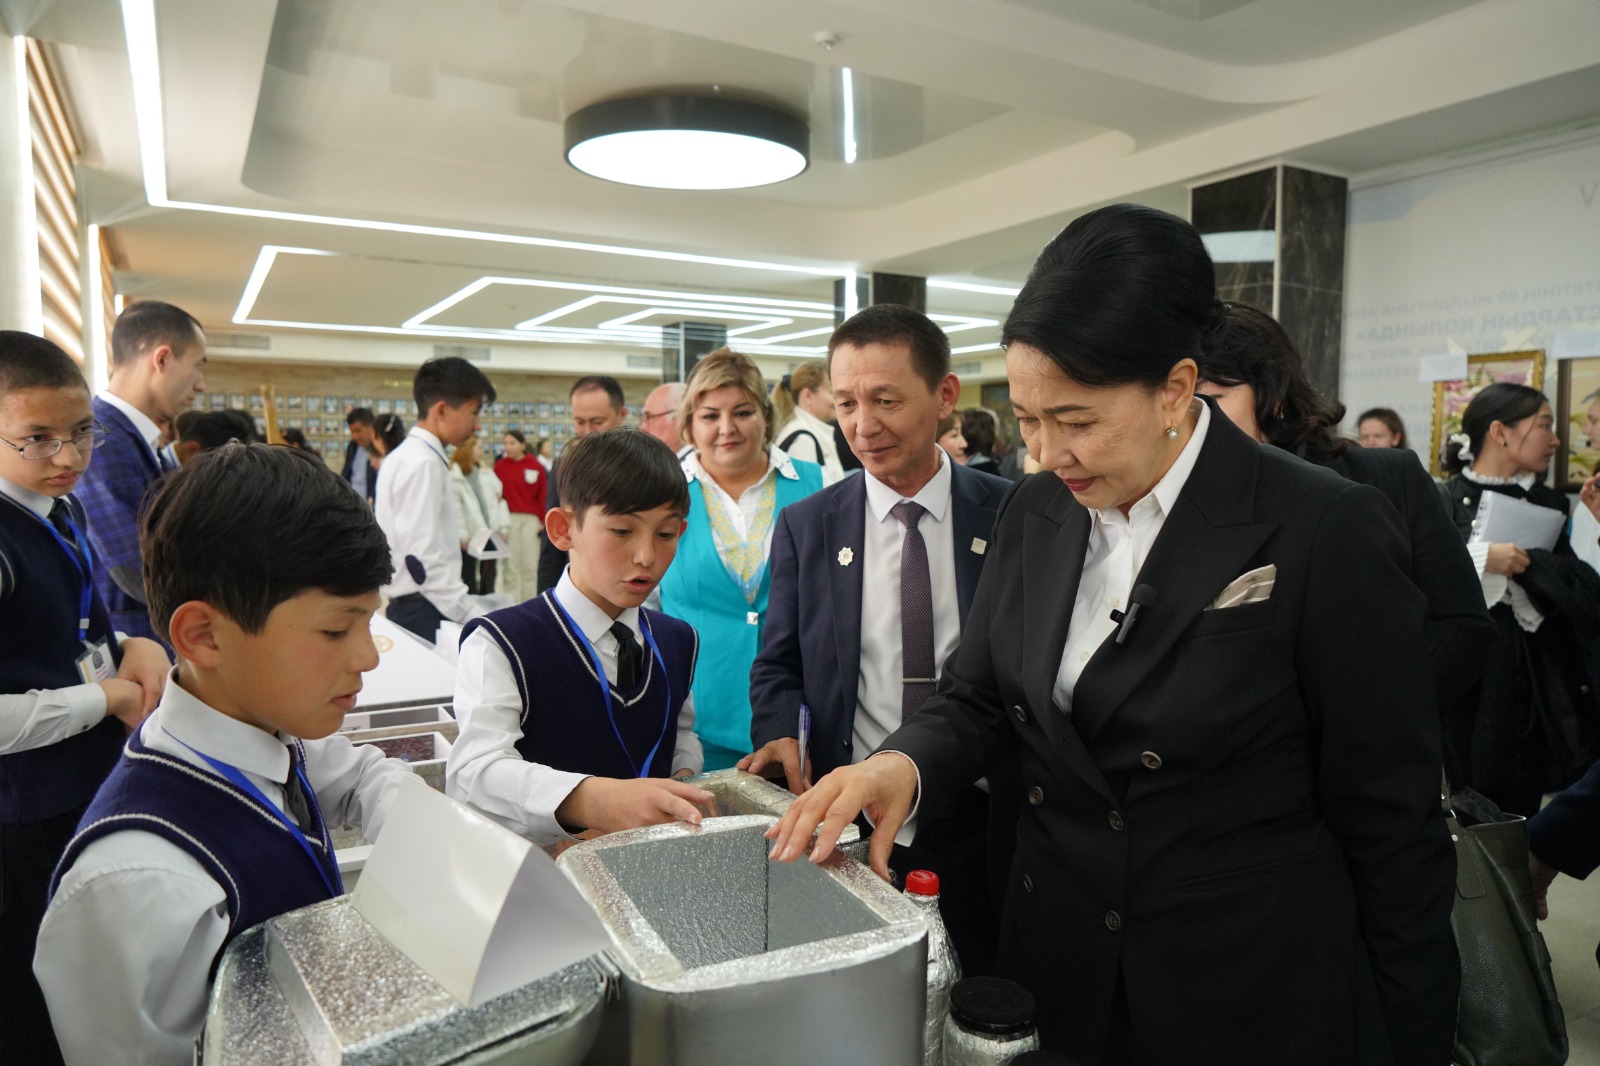 The opening of the «Decade of Science» dedicated to the Day of Science Workers of the Republic of Kazakhstan took place at the South Kazakhstan University named M.Auezov